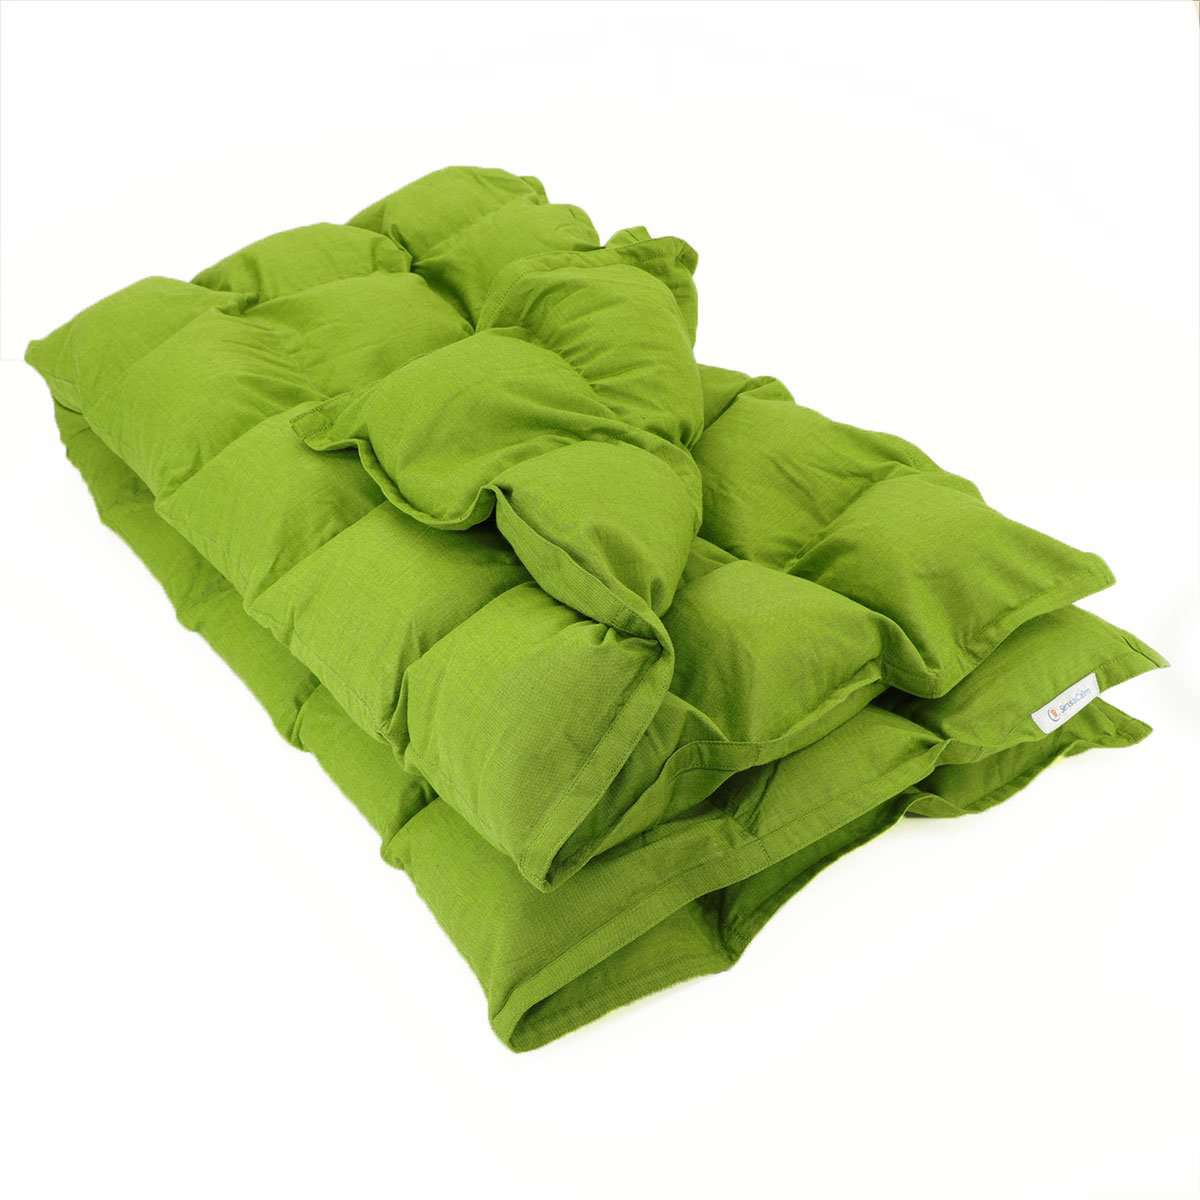 Classic Weighted Blanket - Citron Green